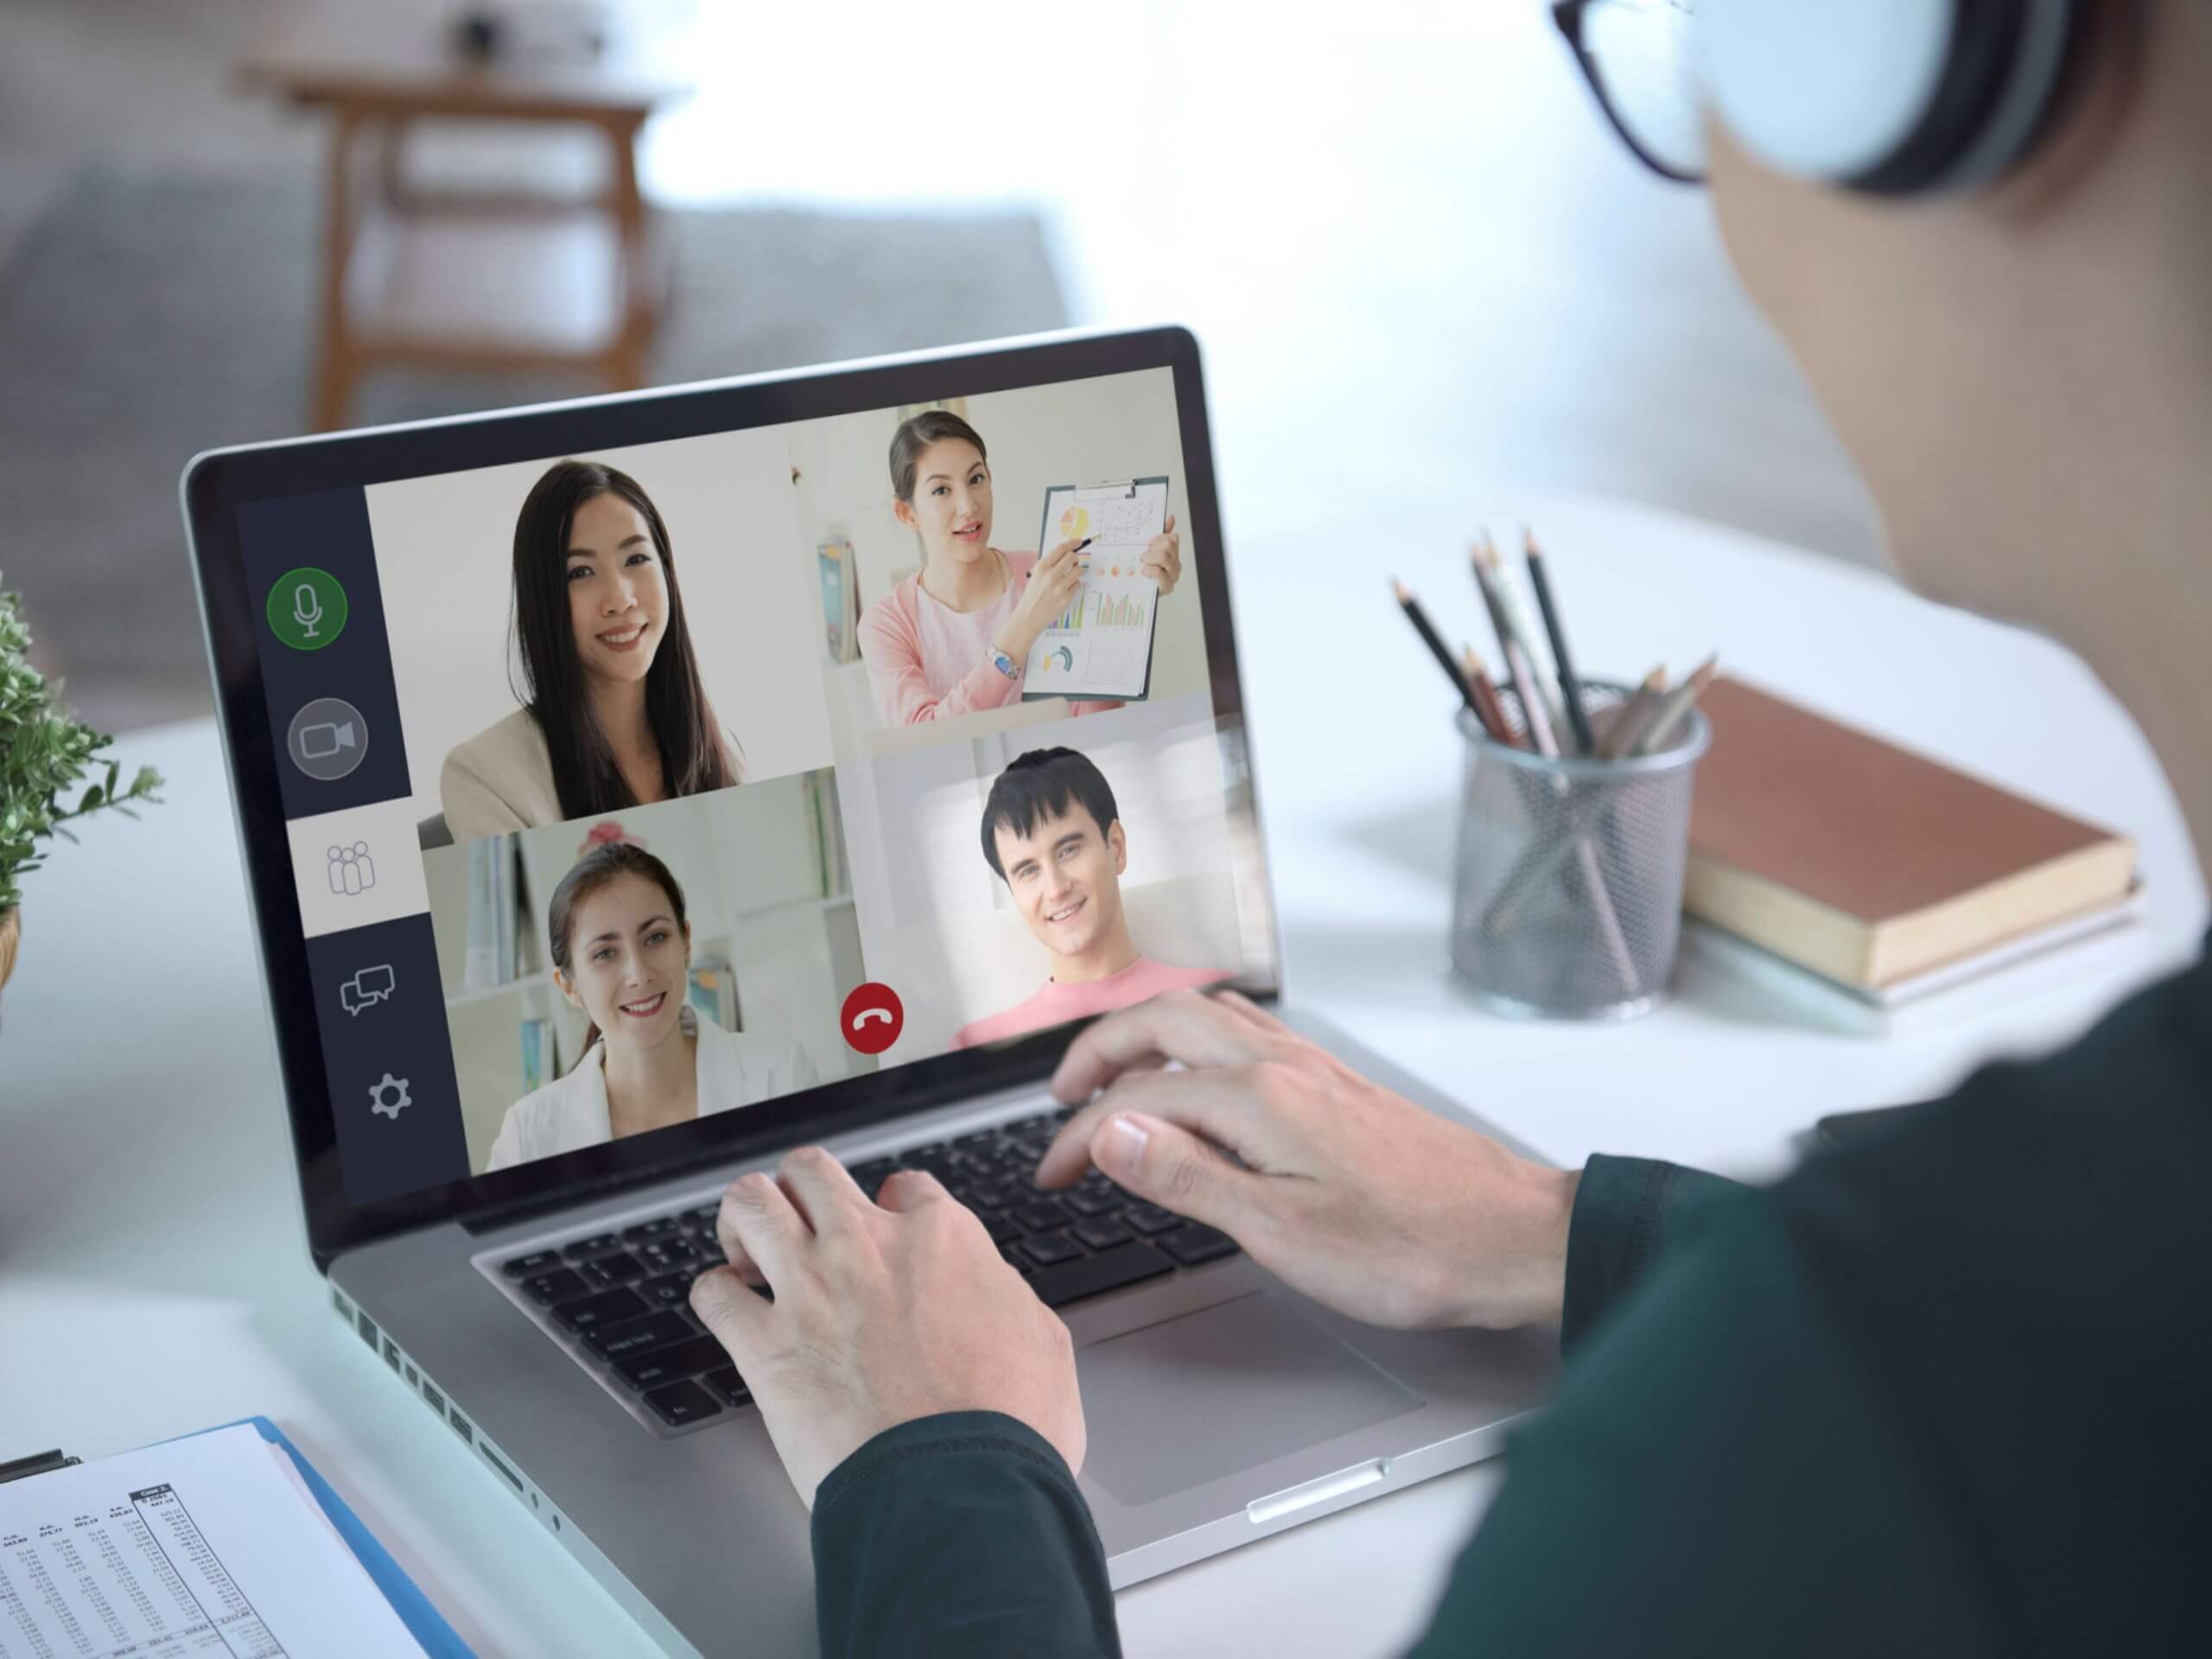 Best Video Conferencing Software for 2022